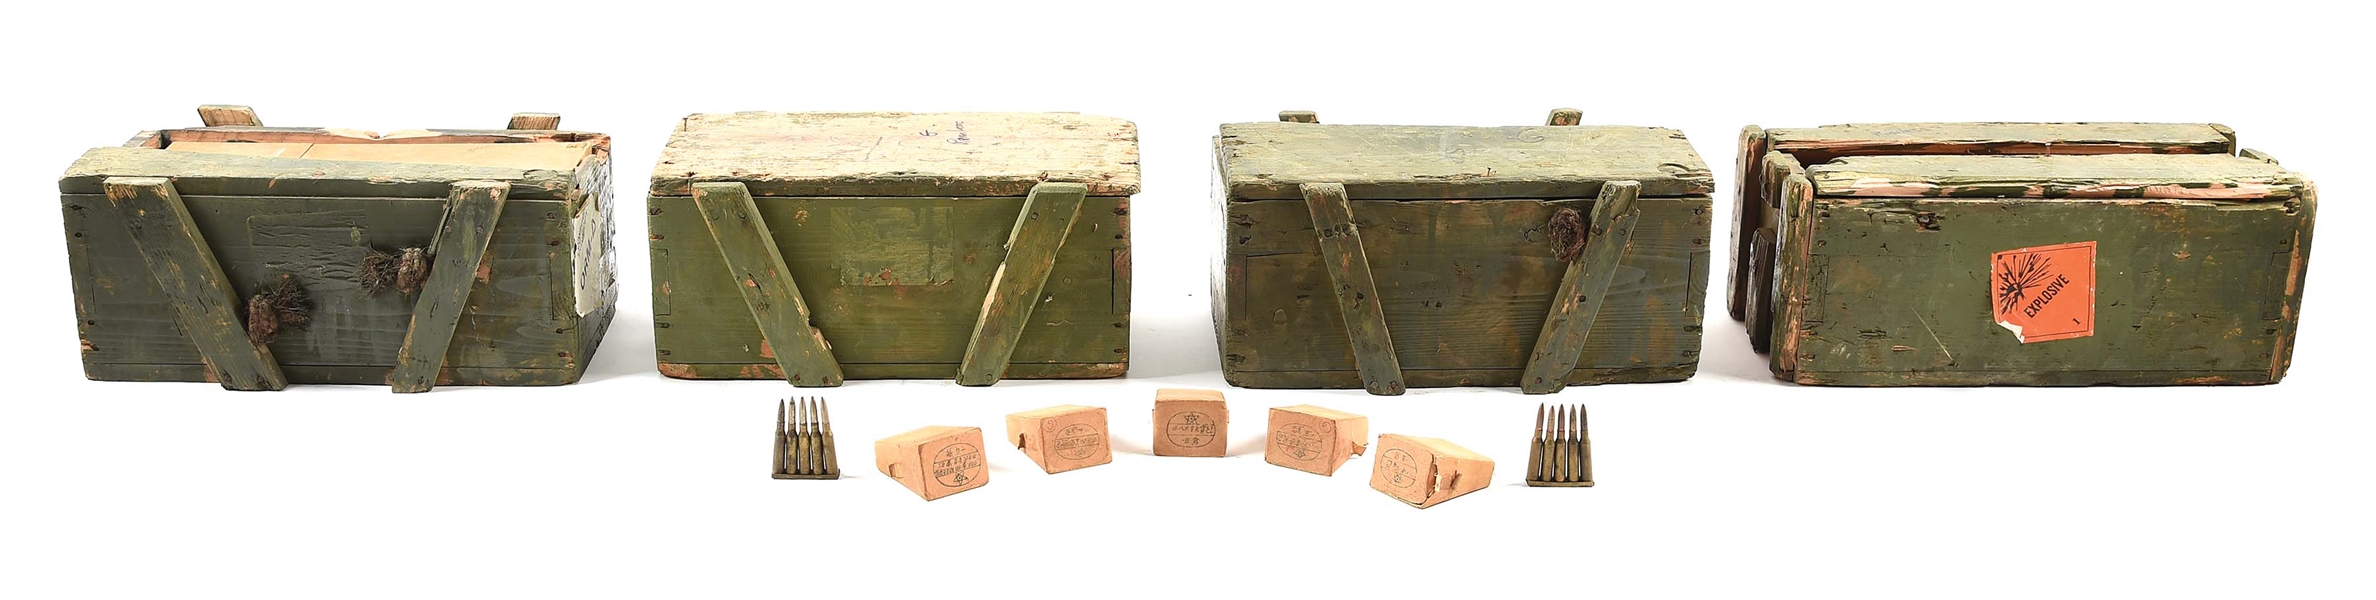 ORIGINAL JAPANESE WWII 7.7 MM AND 6.5 MM MACHINE GUN AMMUNITION ON BRASS HOTCHKISS TYPE FEED STRIPS AND 5 BOXES 6.5 MM ON RIFLE CLIPS.